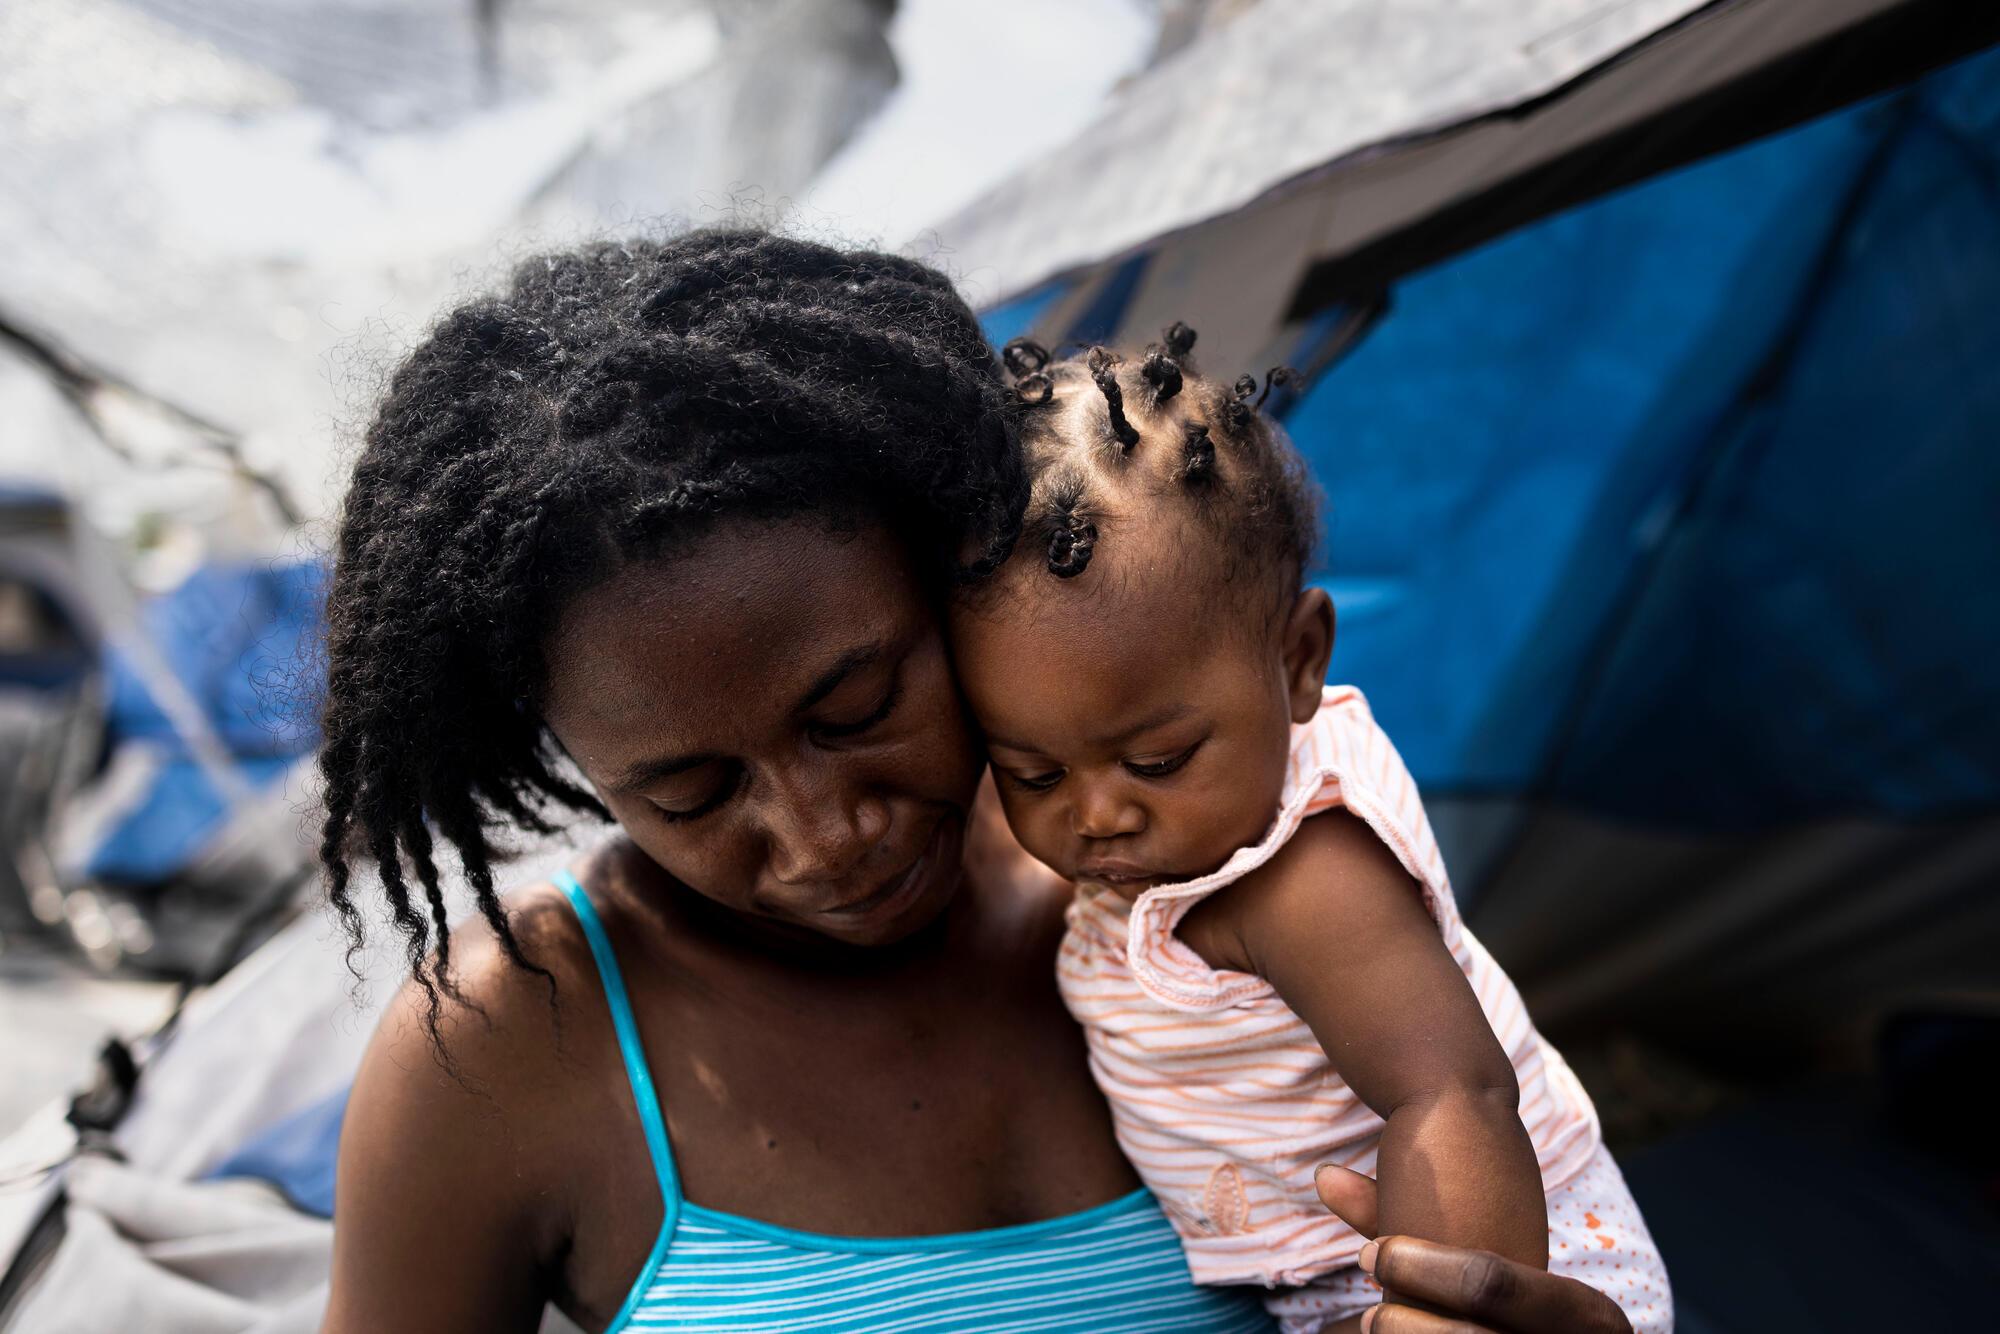 Dalila, 29, and her six-month-old daughter, Blandina, live at the “Senda de Vida” migrant shelter in Reynosa, Mexico. 